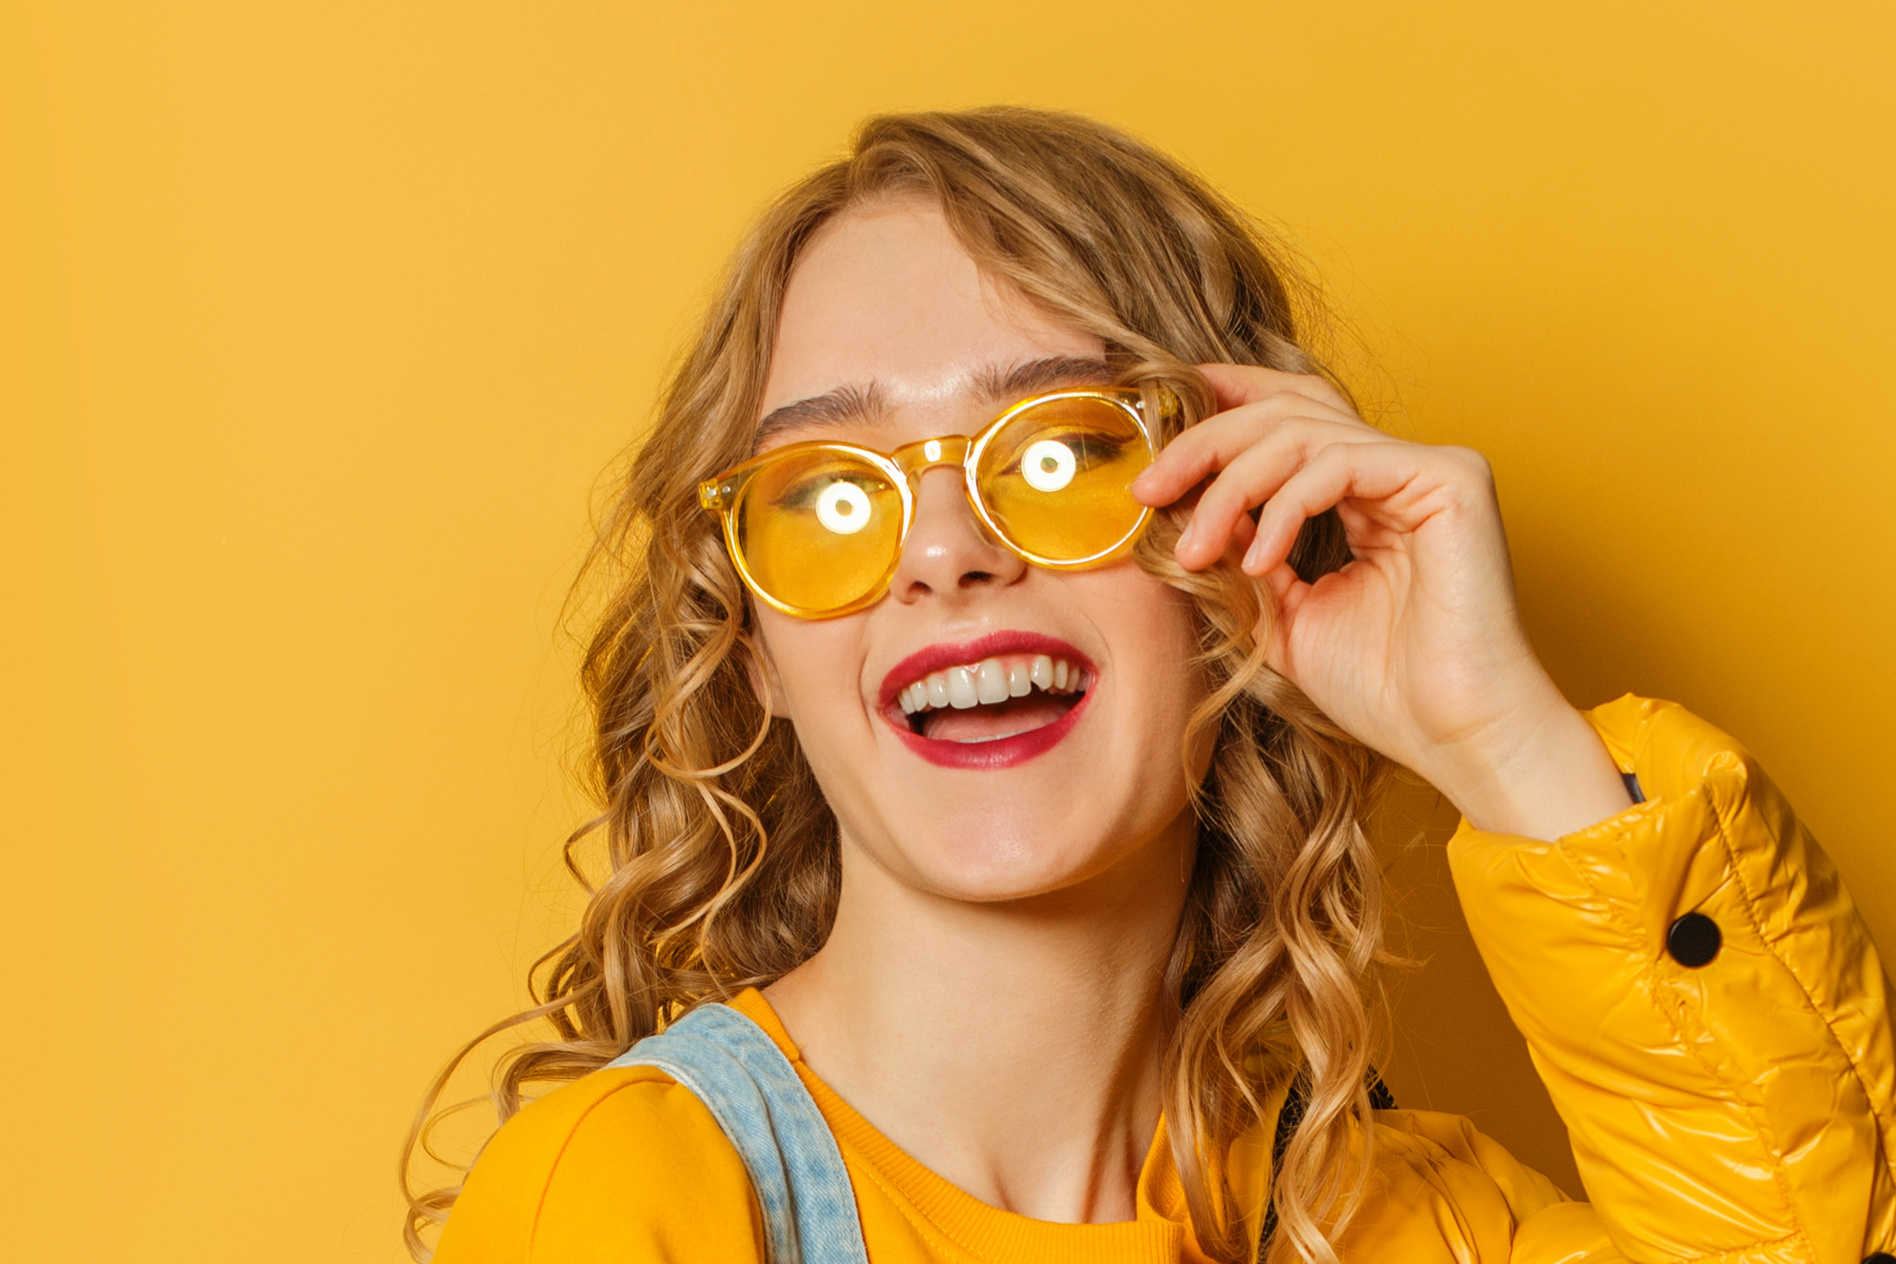 Happy woman wearing sunglasses smiling on yellow background